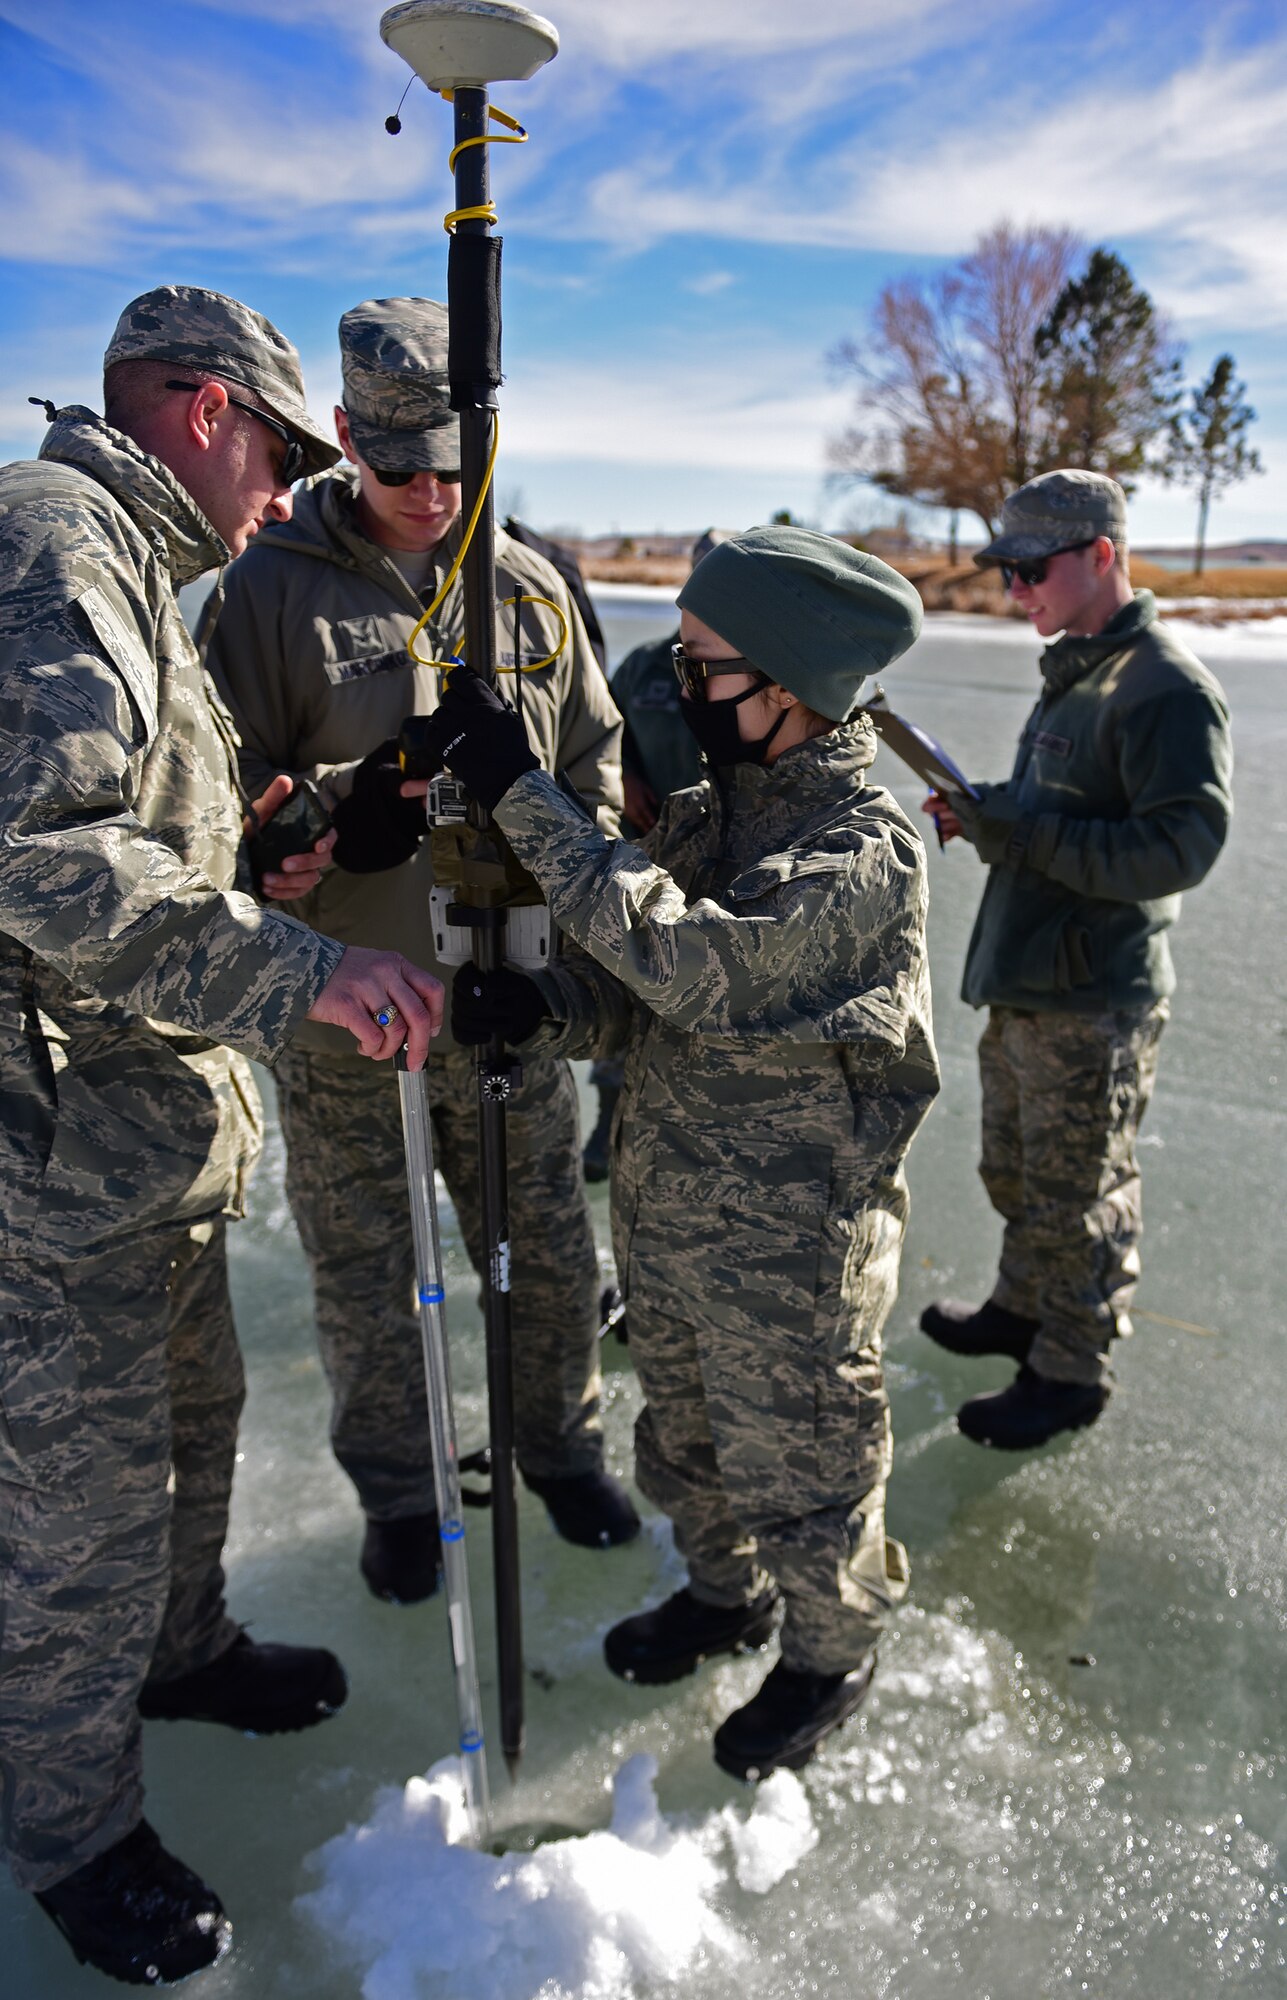 Airman 1st Class Clara Song, an engineering technician assigned to the 28th Civil Engineer Squadron, keeps survey equipment steady as other 28th CES Airmen record the water level readings at Ellsworth Air Force Base, S.D., Feb. 14, 2017.  The readings taken from the lake will help determine the need for future projects. (U.S. Air Force photo by Senior Airman James L. Miller)